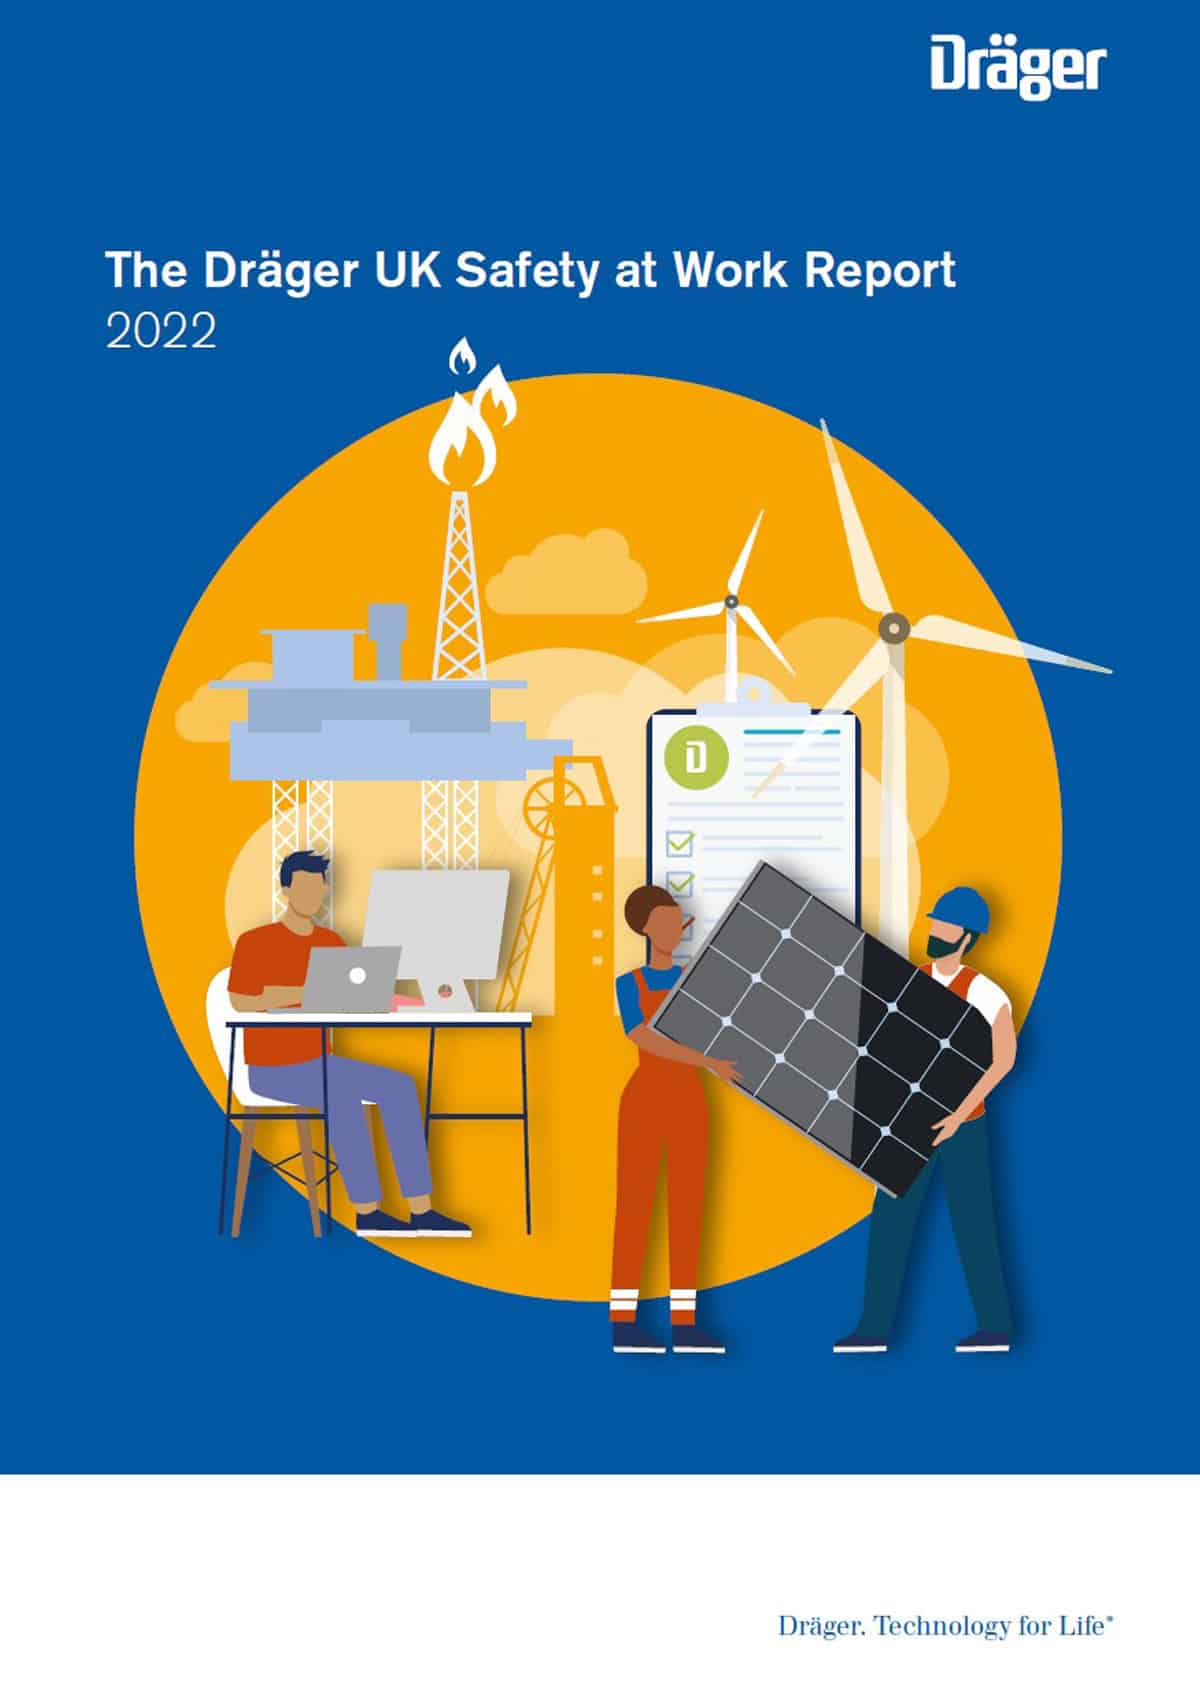 The 2022 Dräger UK Safety at Work Report